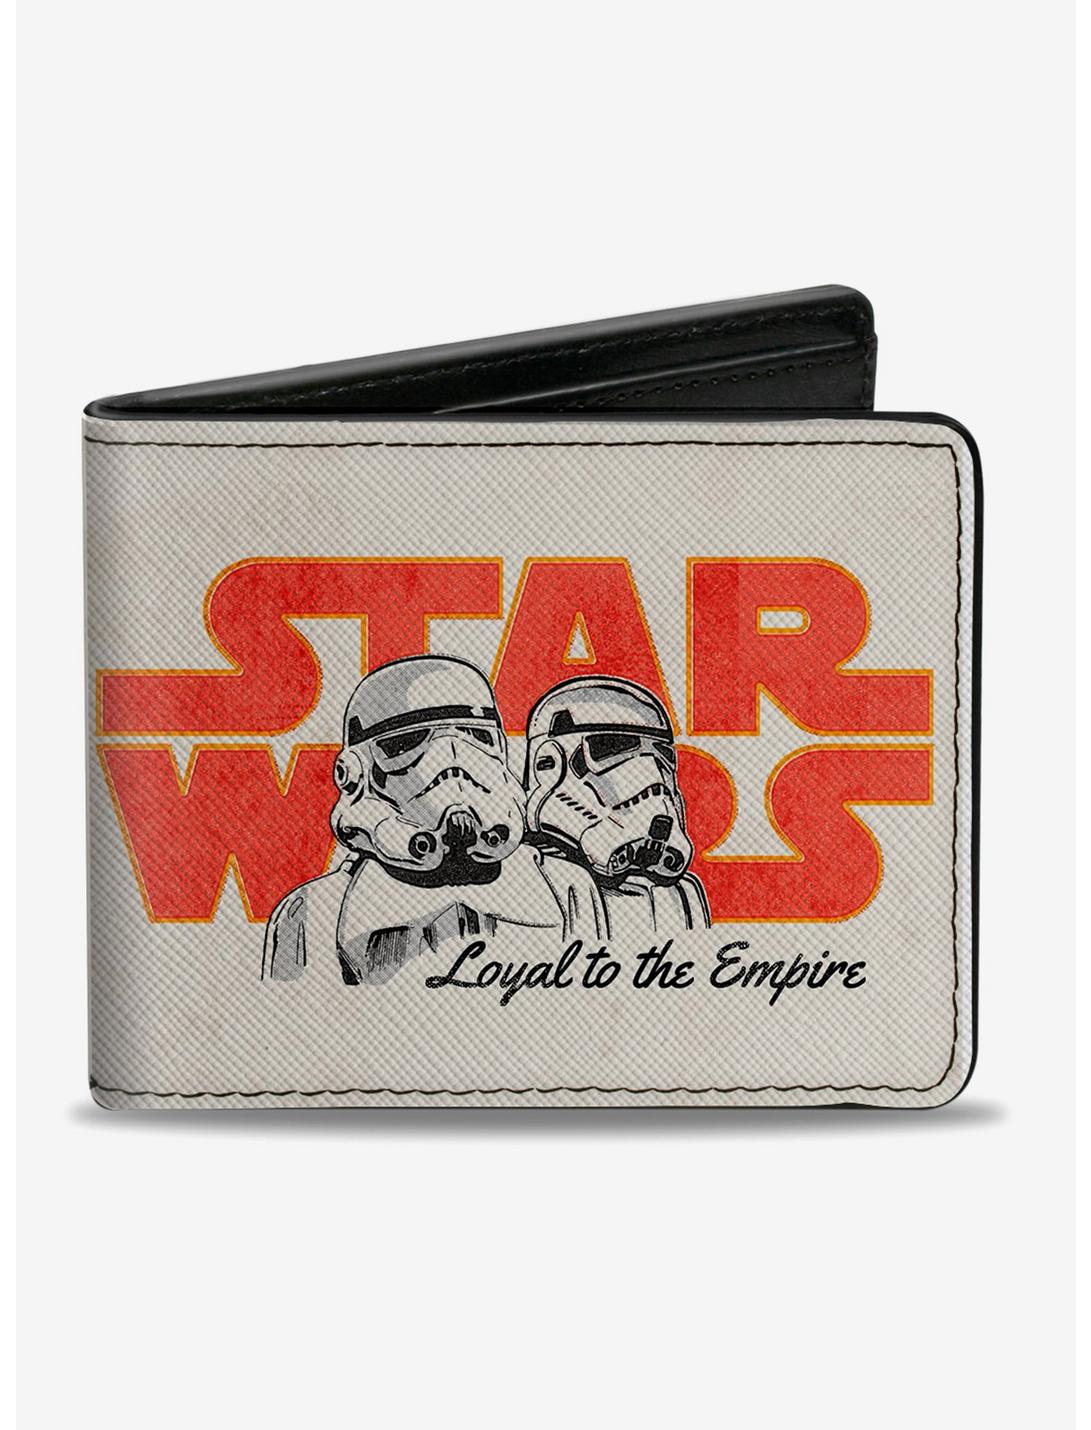 Star Wars Stormtroopers Loyal To The Empire Bifold Wallet, , hi-res